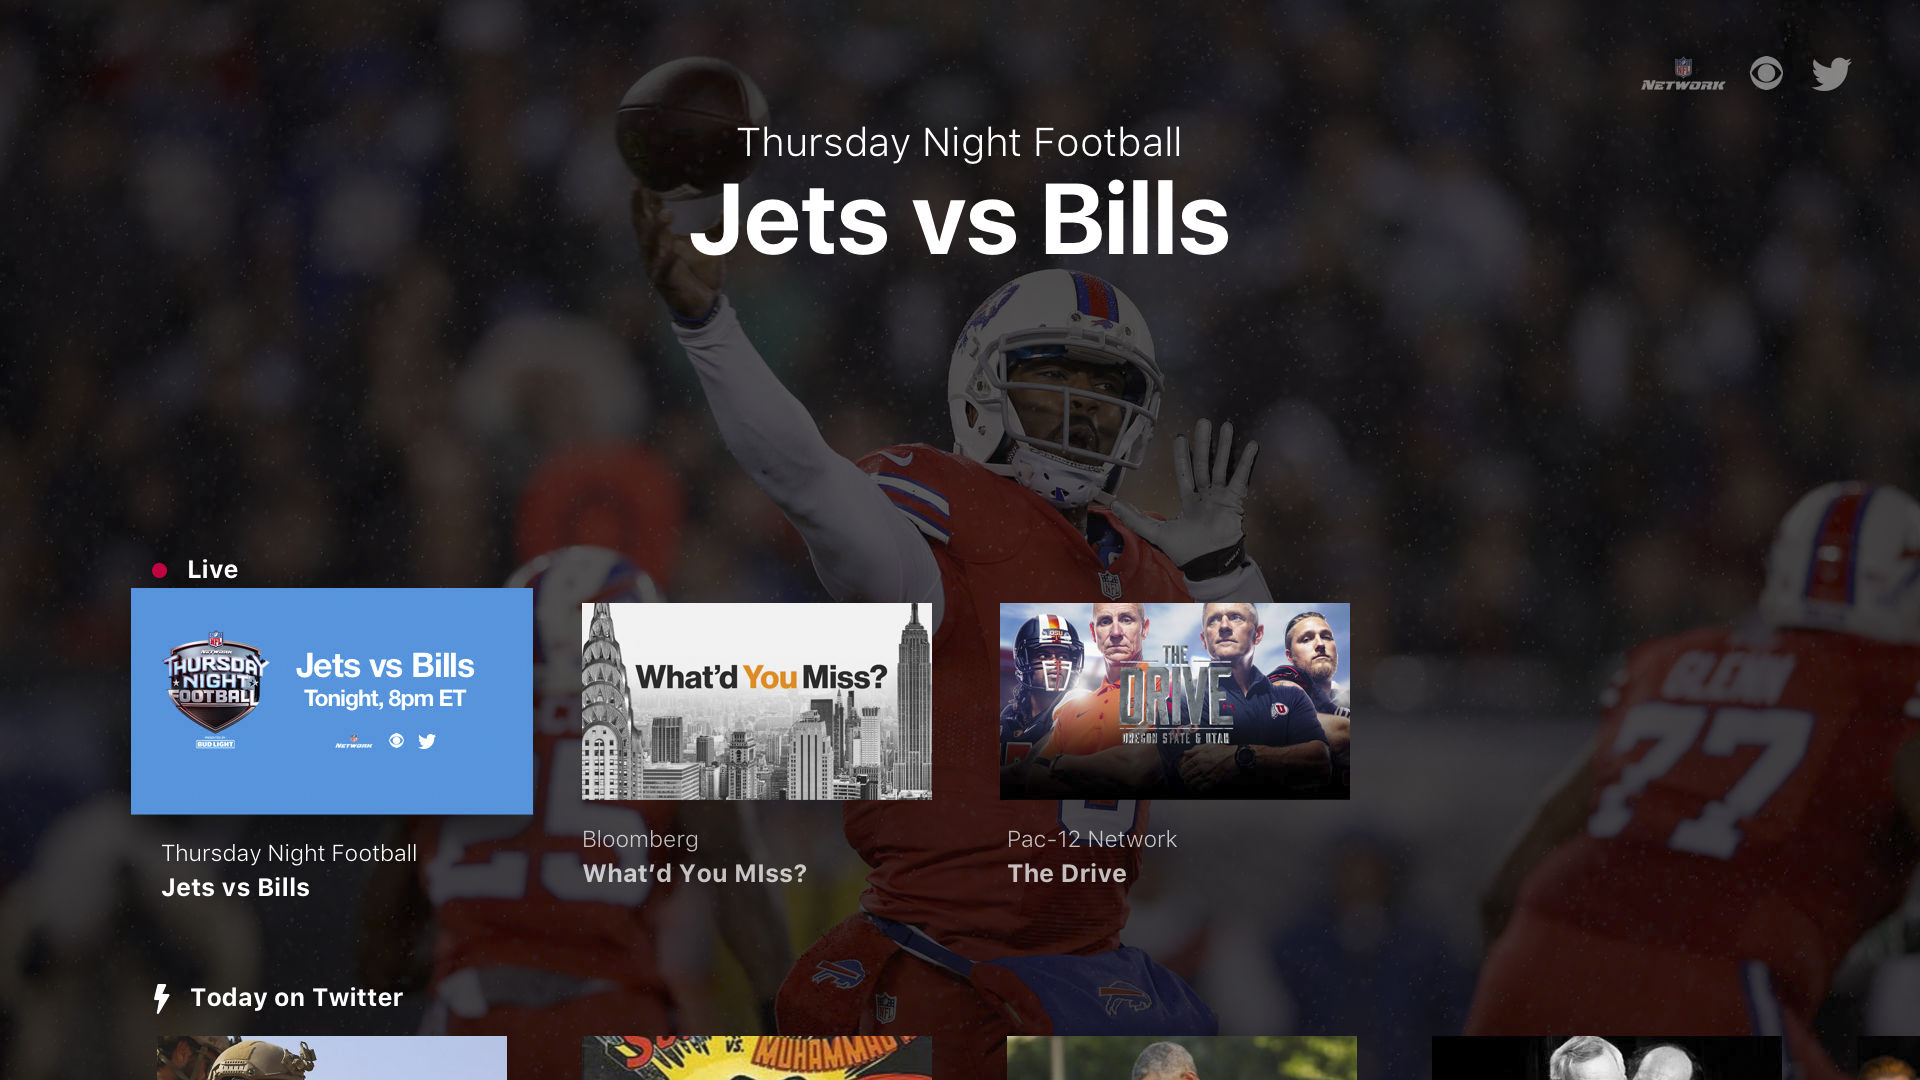 New Twitter app streams NFL games and other sports